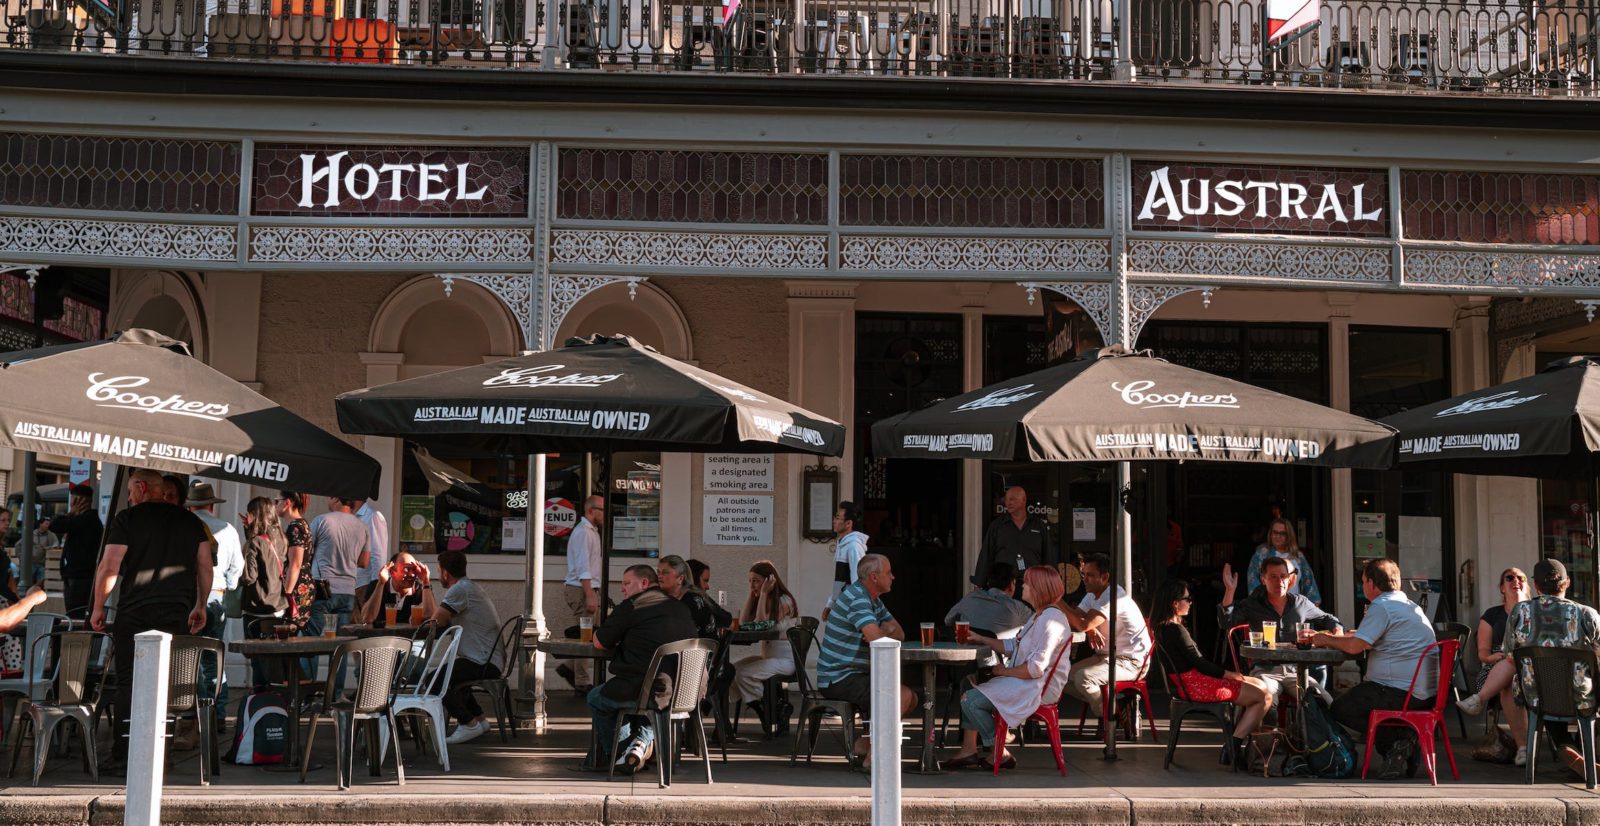 Outside The Austral On a Sunny Day